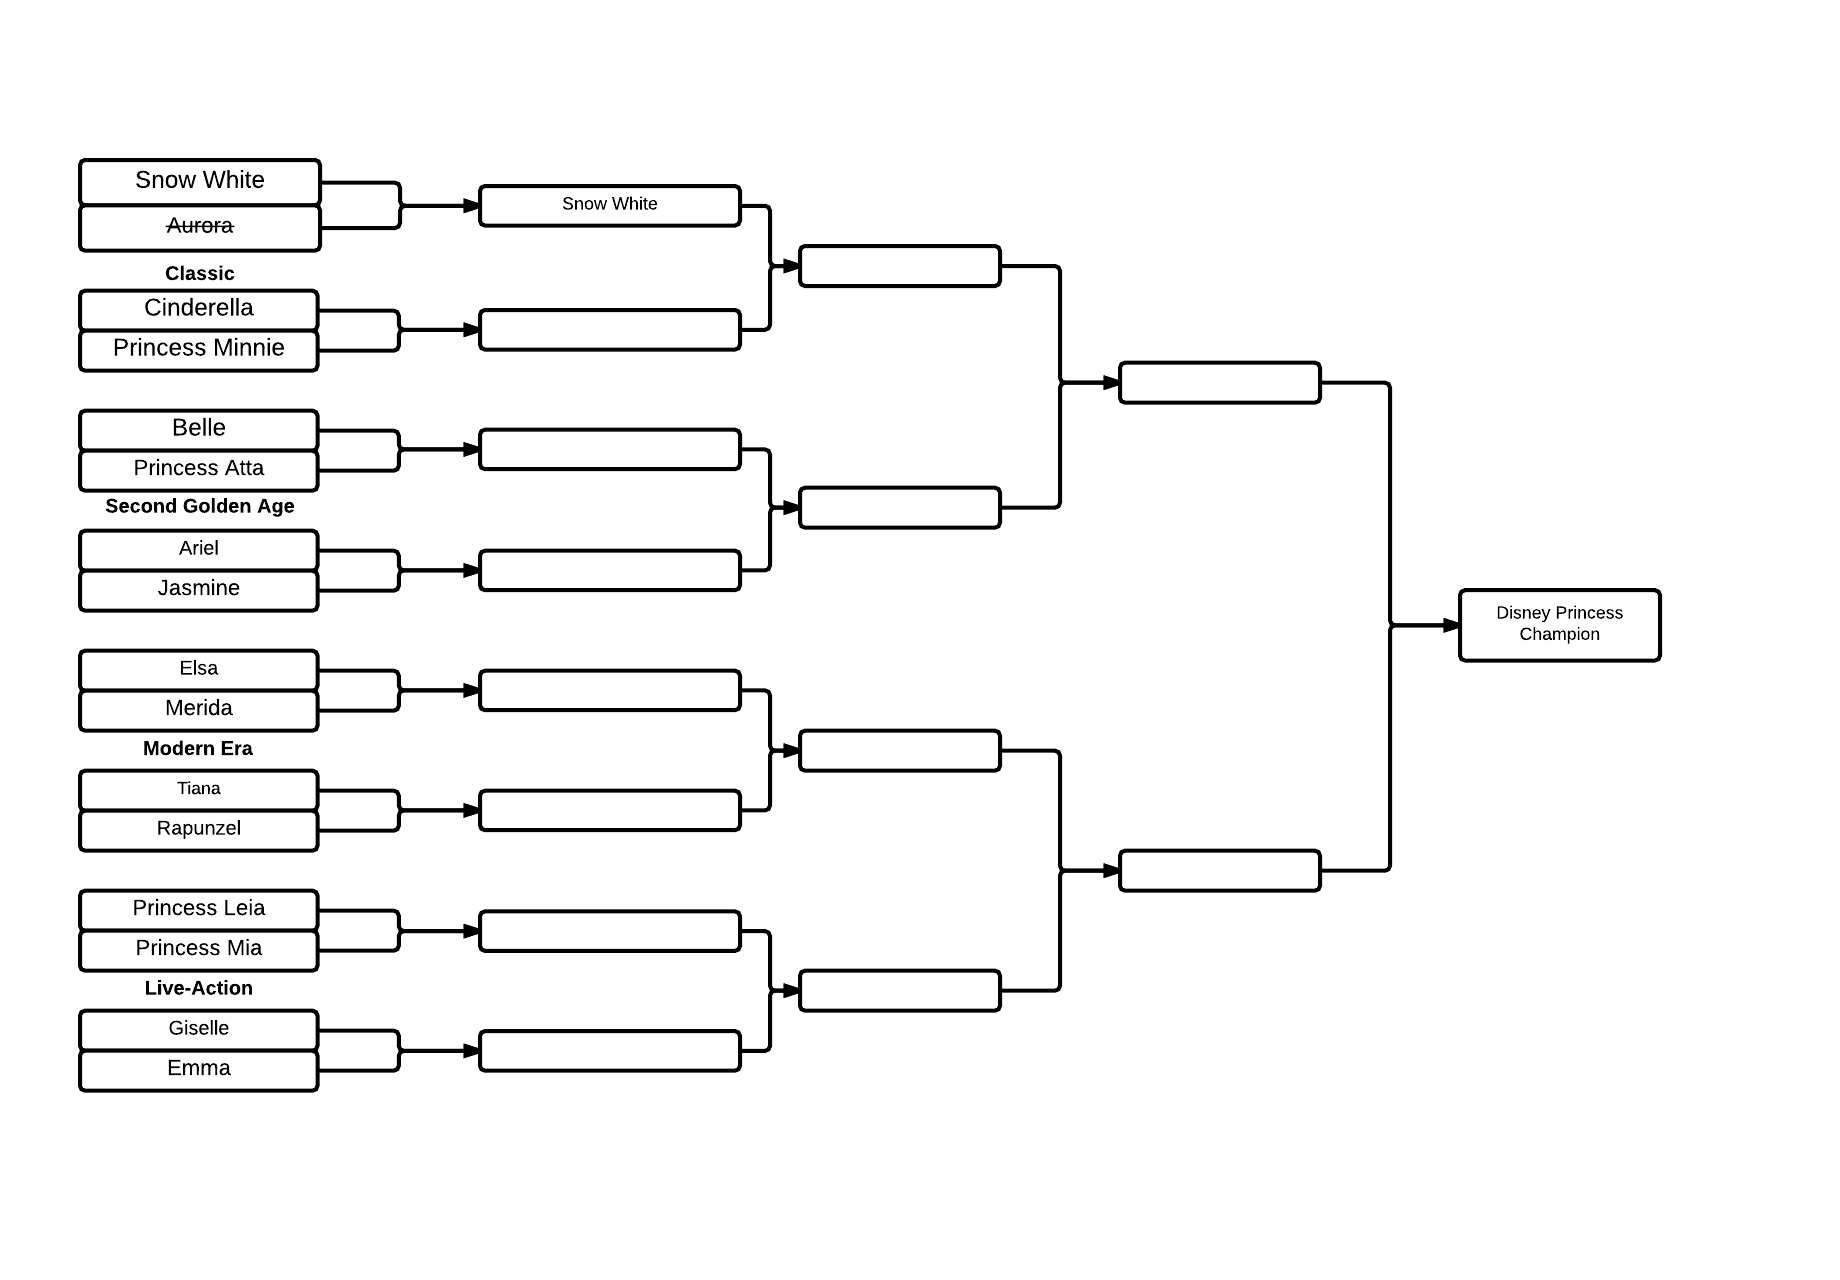 March Madness Bracket 2015 - New Page